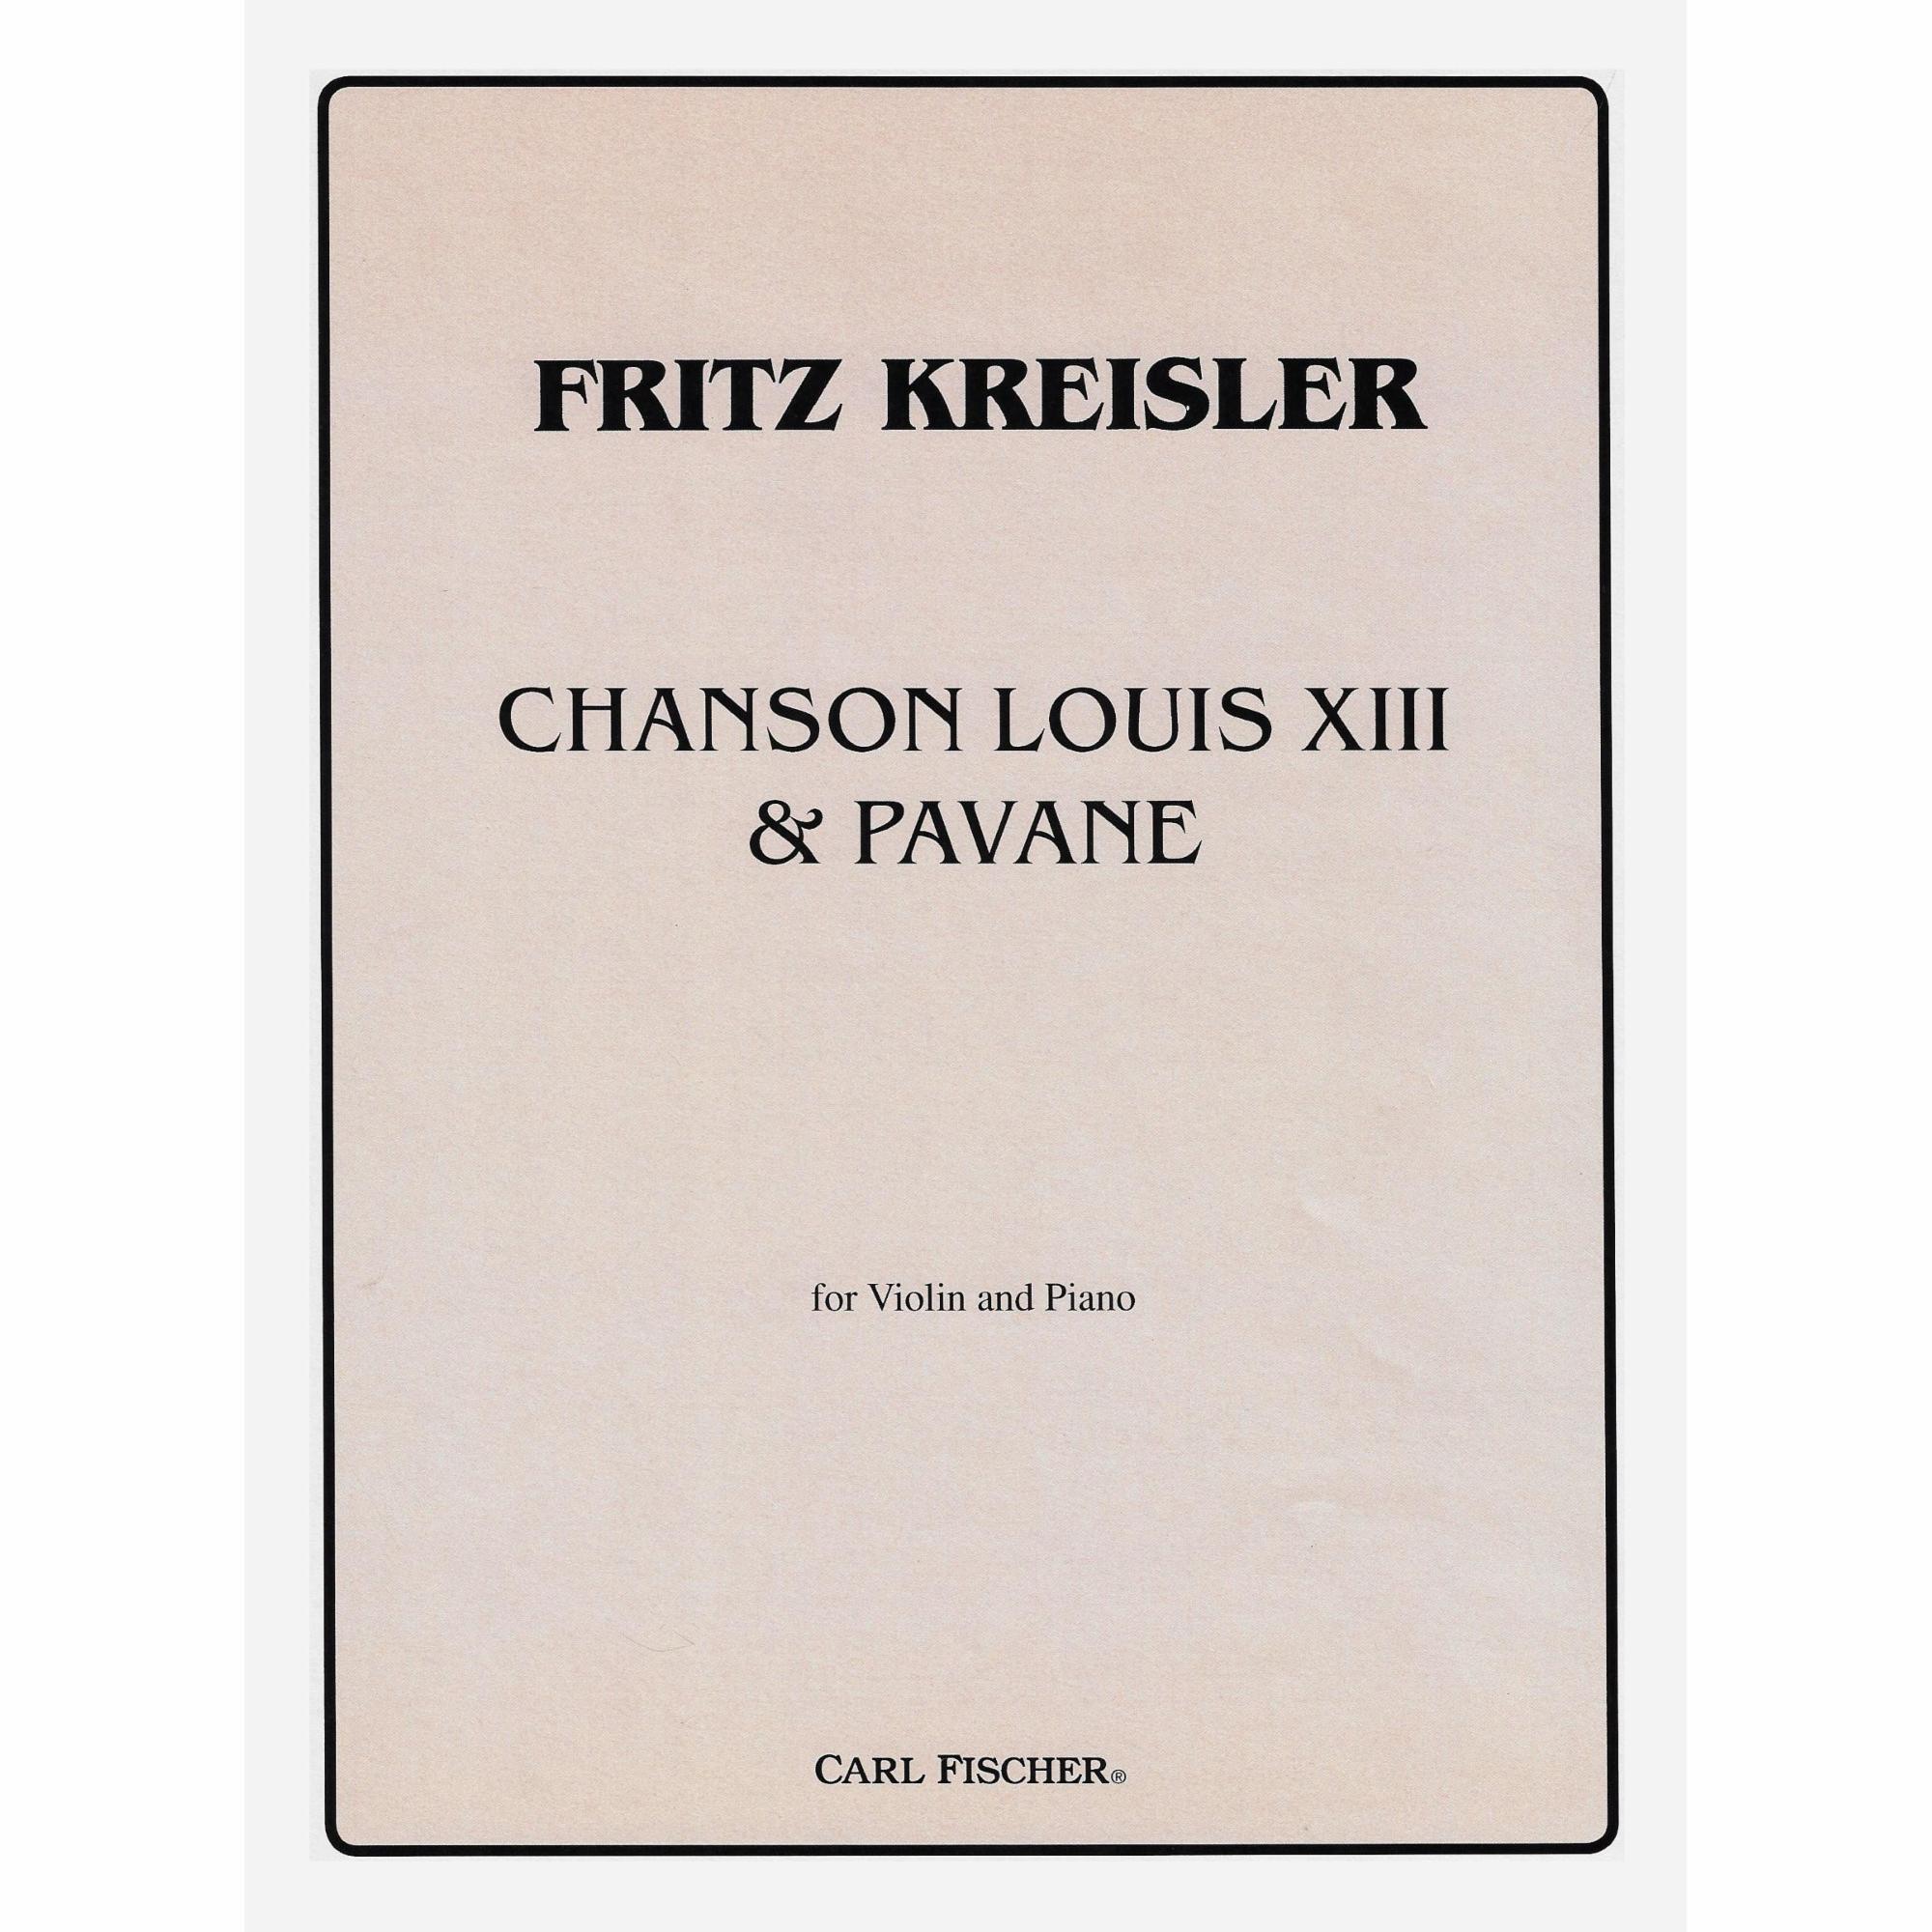 Kreisler -- Chanson Louis XIII & Pavane for Violin and Piano